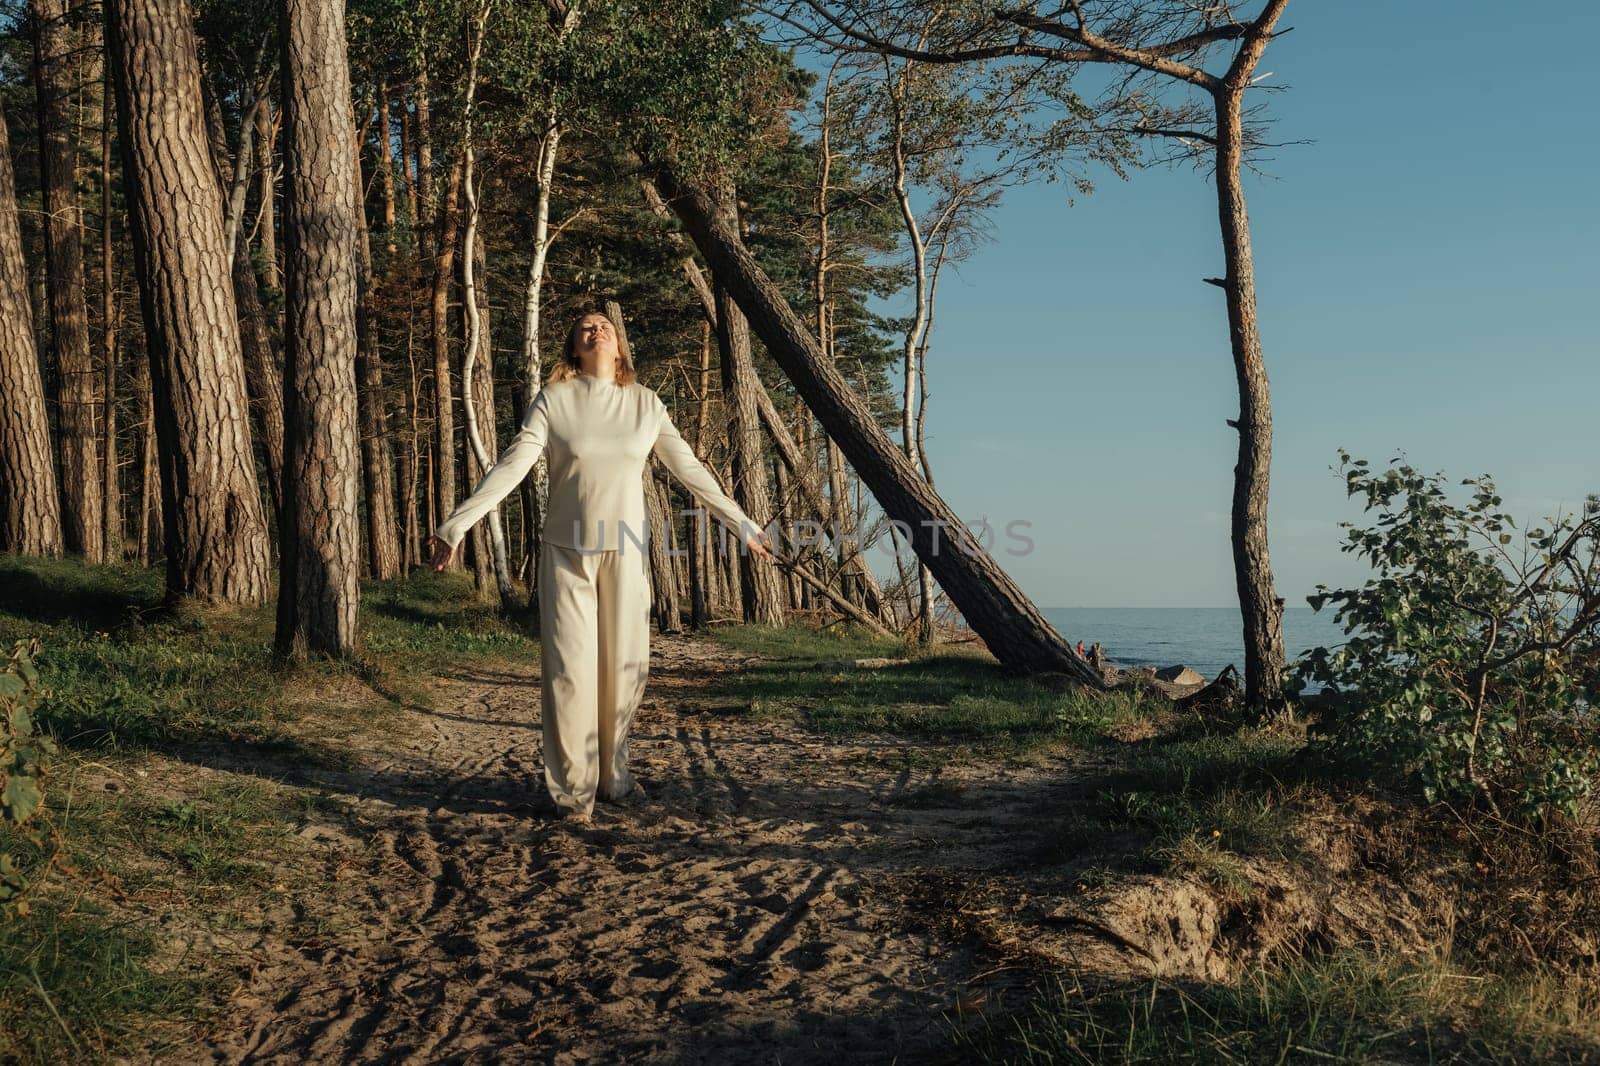 A woman dressed in white clothing is walking down a path, surrounded by nature.